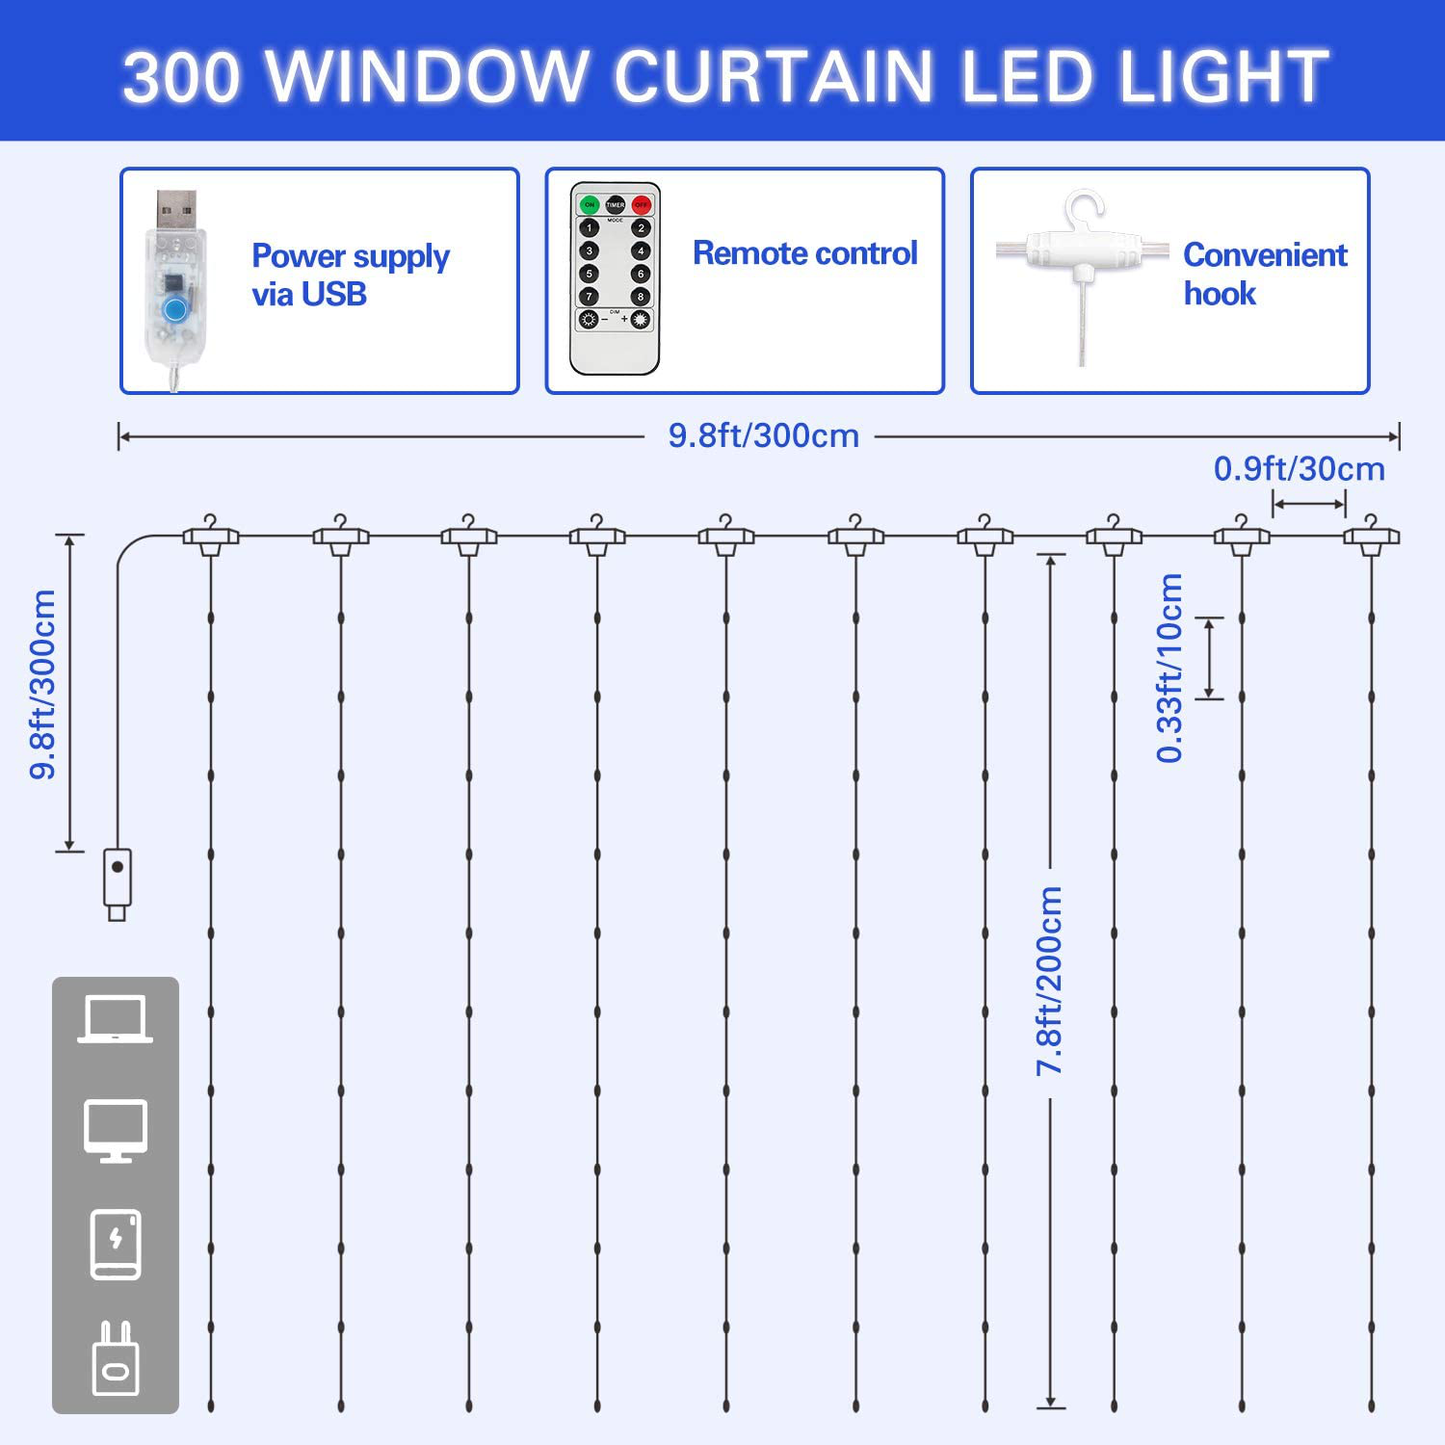 Window Curtain String Light 300 LEDs USB Powered Waterproof Fairy Lights 8 Lighting Modes Remote Control Lights for Christmas Bedroom Party Wedding Home Garden Wall Decorations, (White)